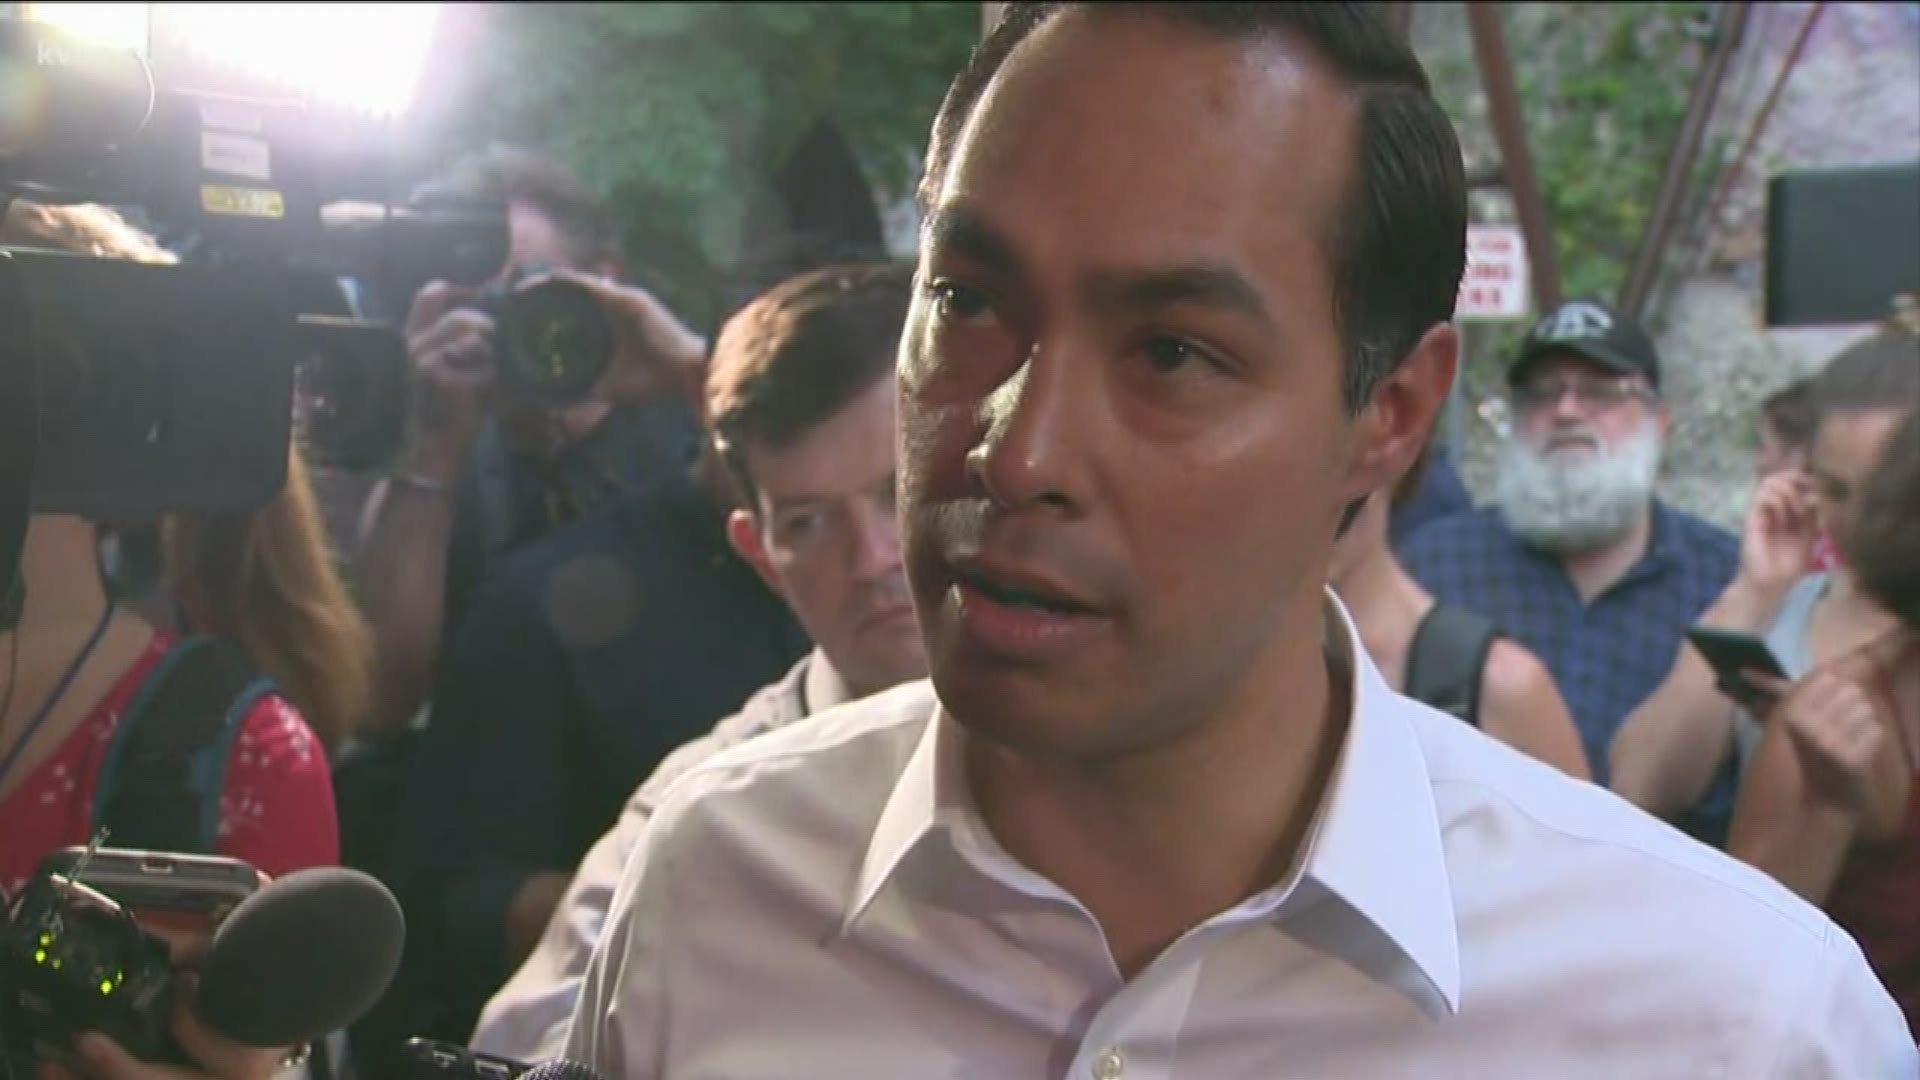 A spokesperson with the Texas Democratic Party said more than 250 people paid to hear from and meet Julian Castro.